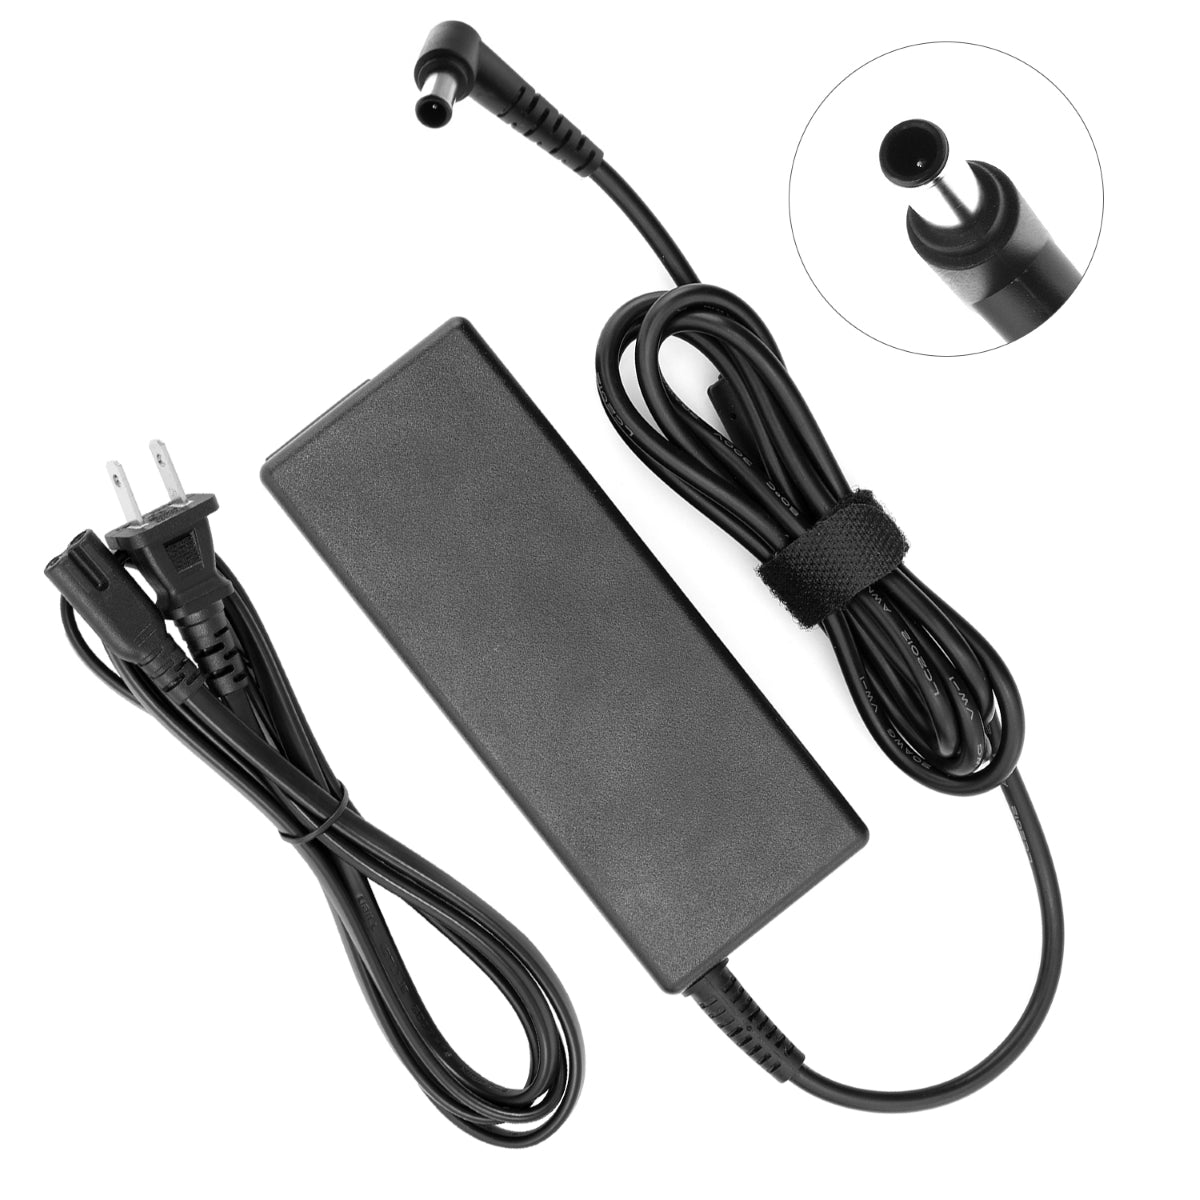 AC Adapter Power Supply for Compaq PE1209 Monitor